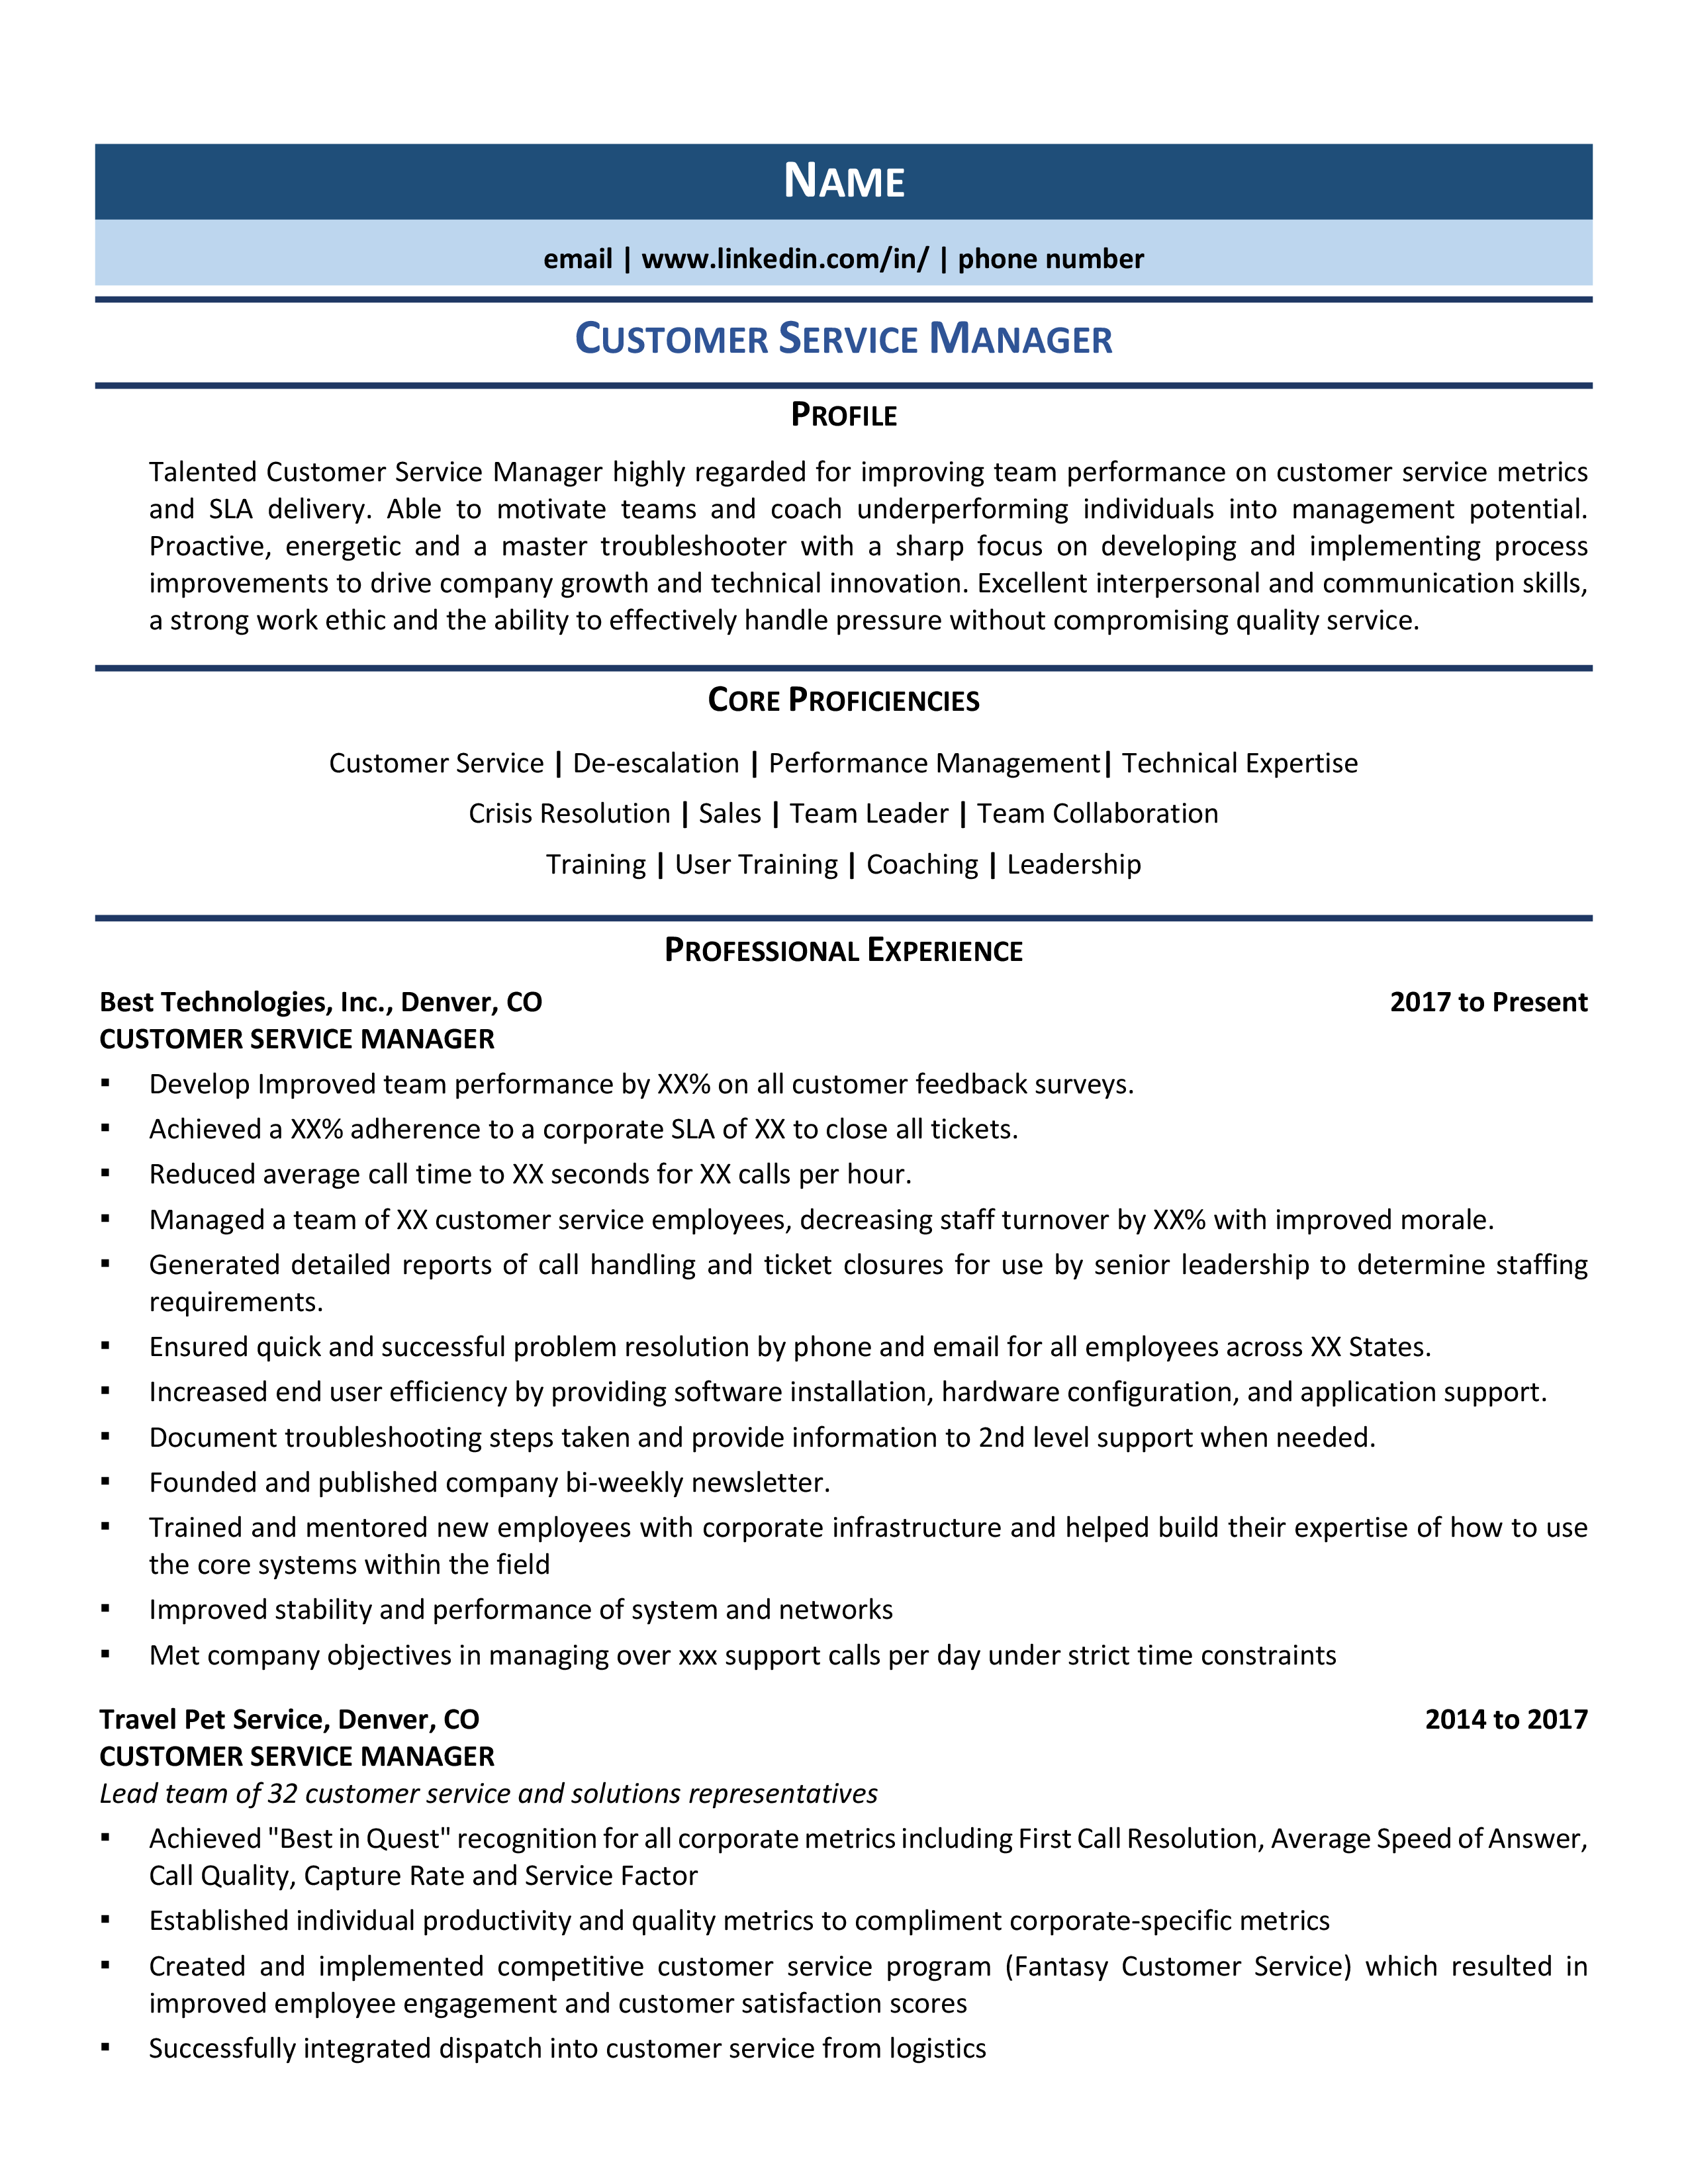 resume for client service manager